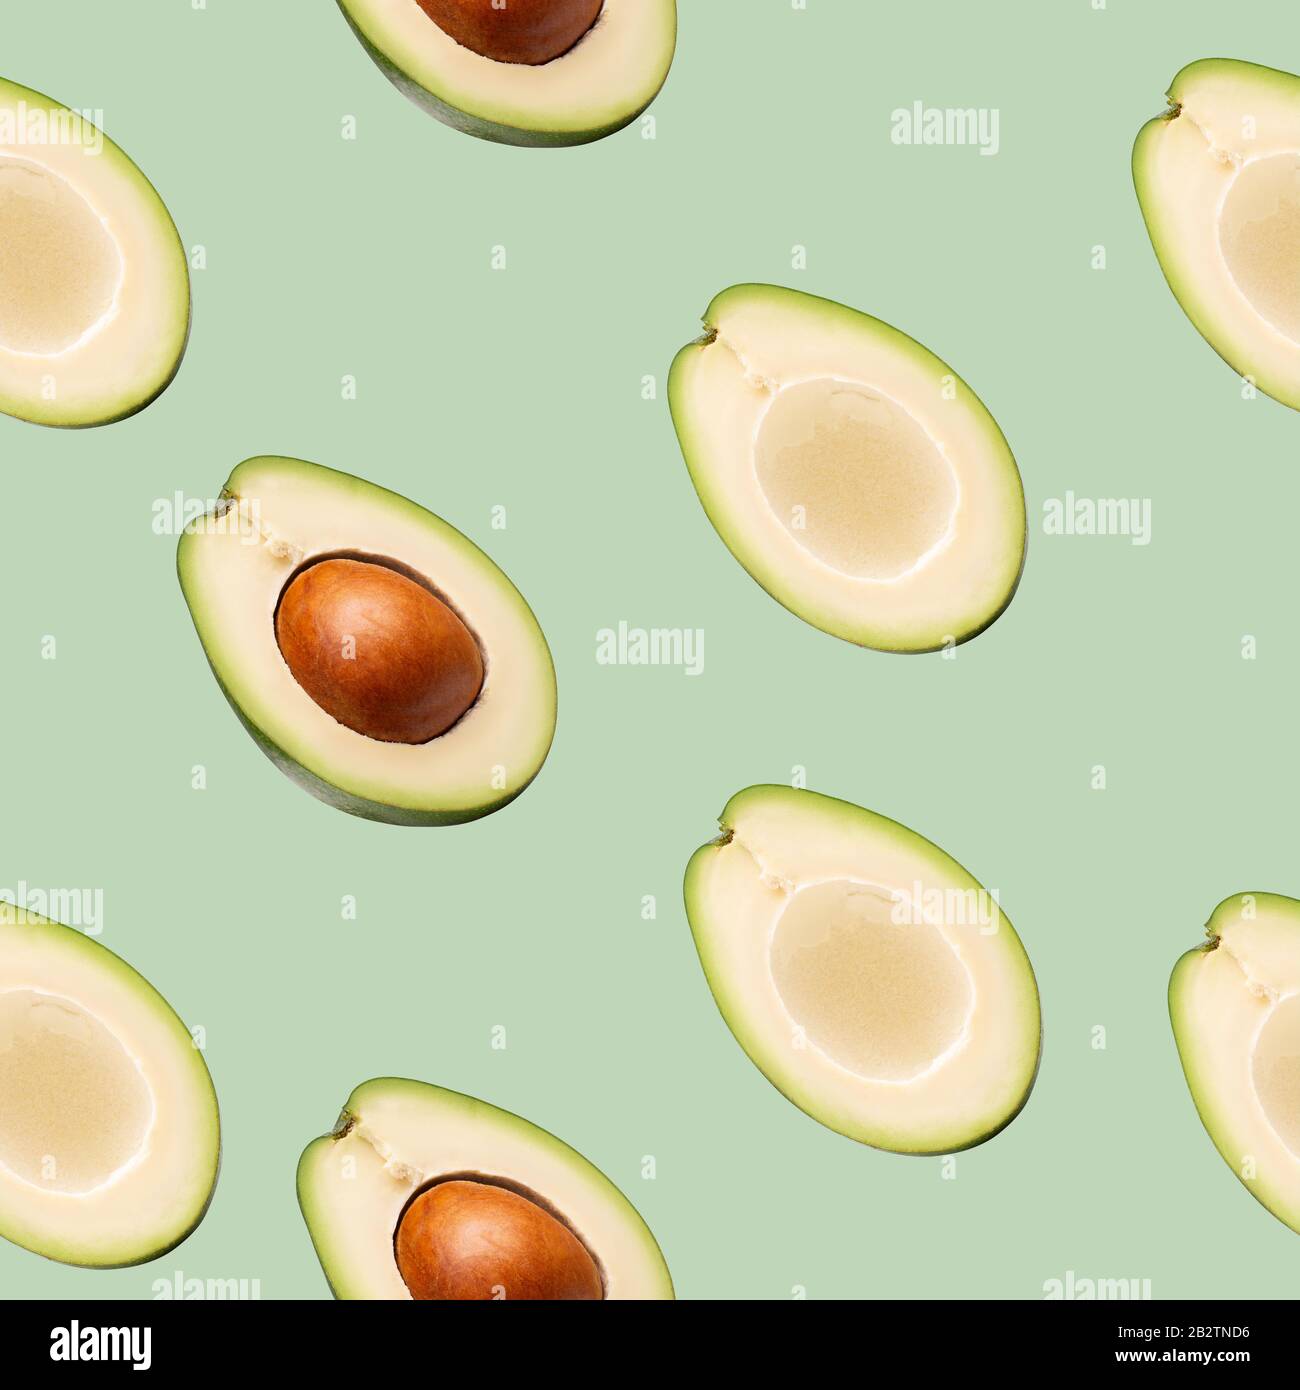 pattern with avocado slices on a green background. Stock Photo